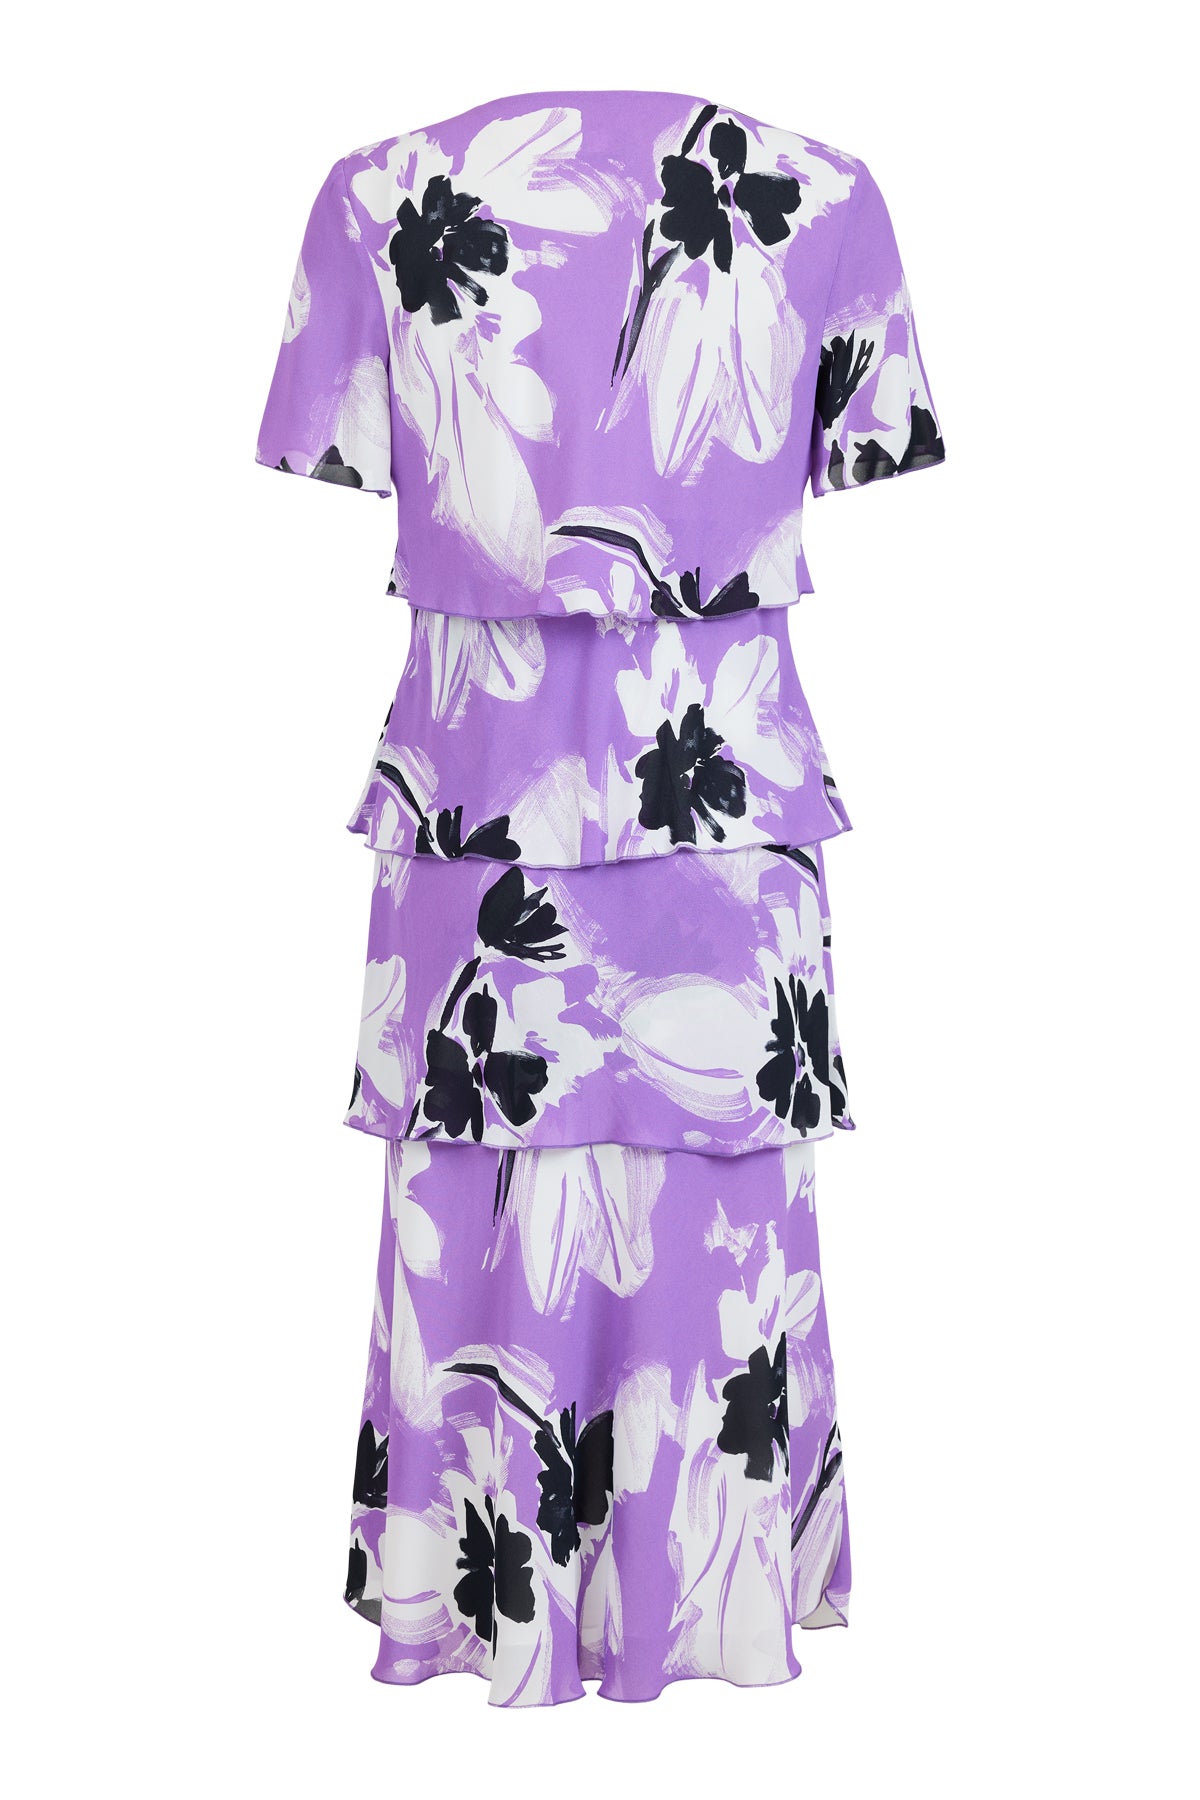 Purple/Black Abstract Print Dress with Layered Effect and Short Sleeves